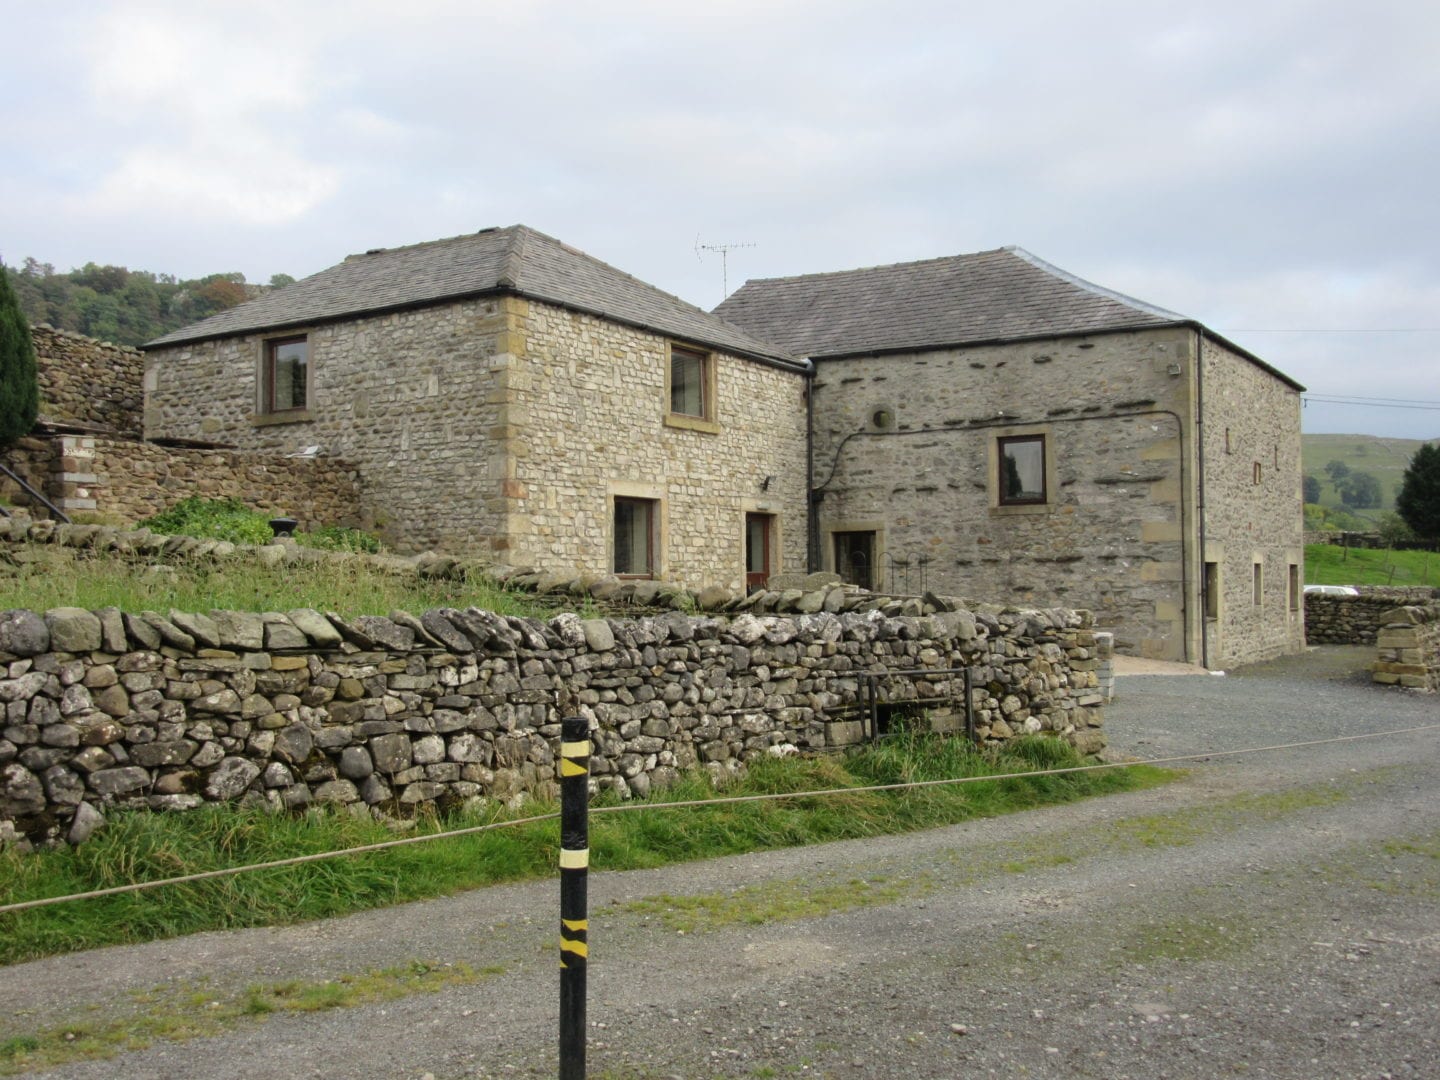 Hornby Laithe Bunkhouse Barn in Yorkshire Dales